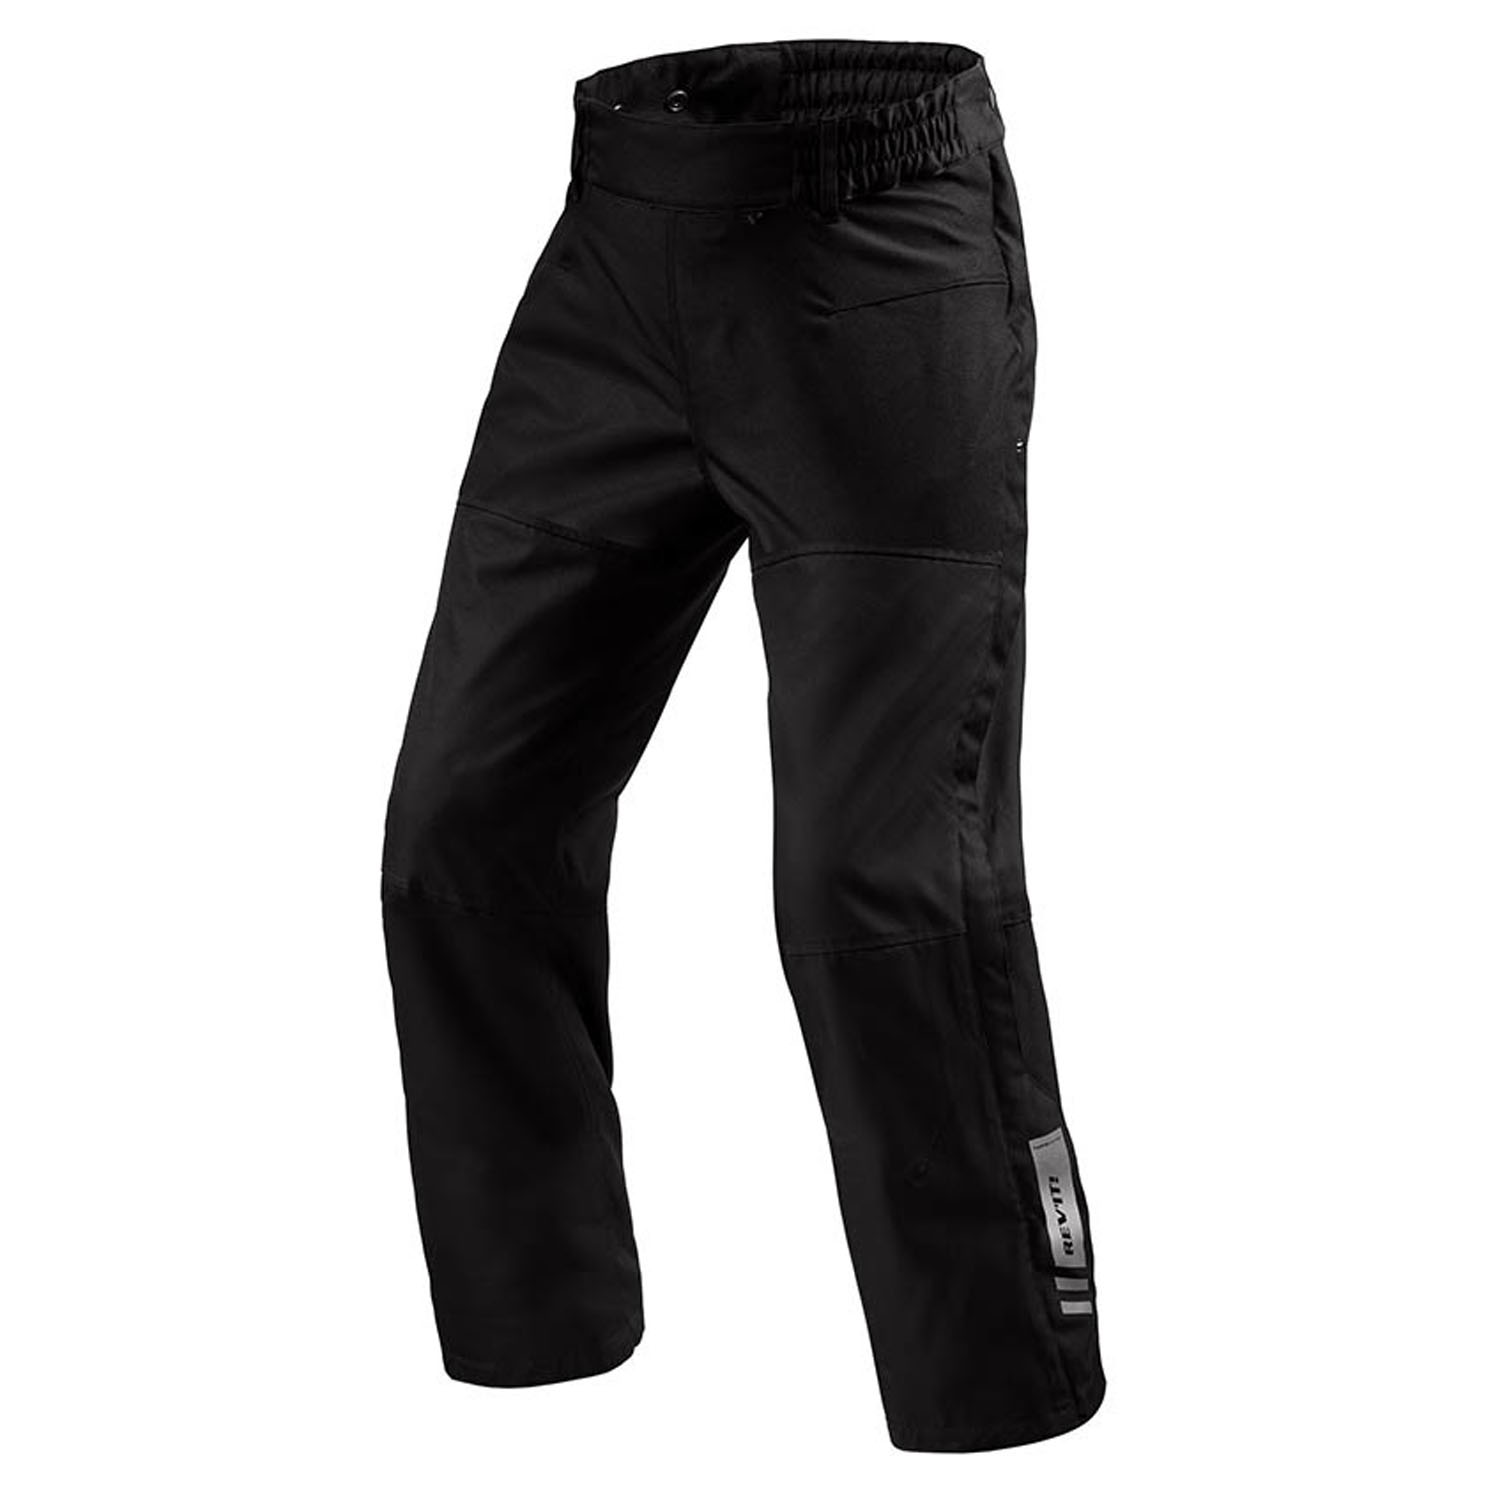 Image of REV'IT! Pants Axis 2 H2O Black Standard Motorcycle Pants Taille 4XL